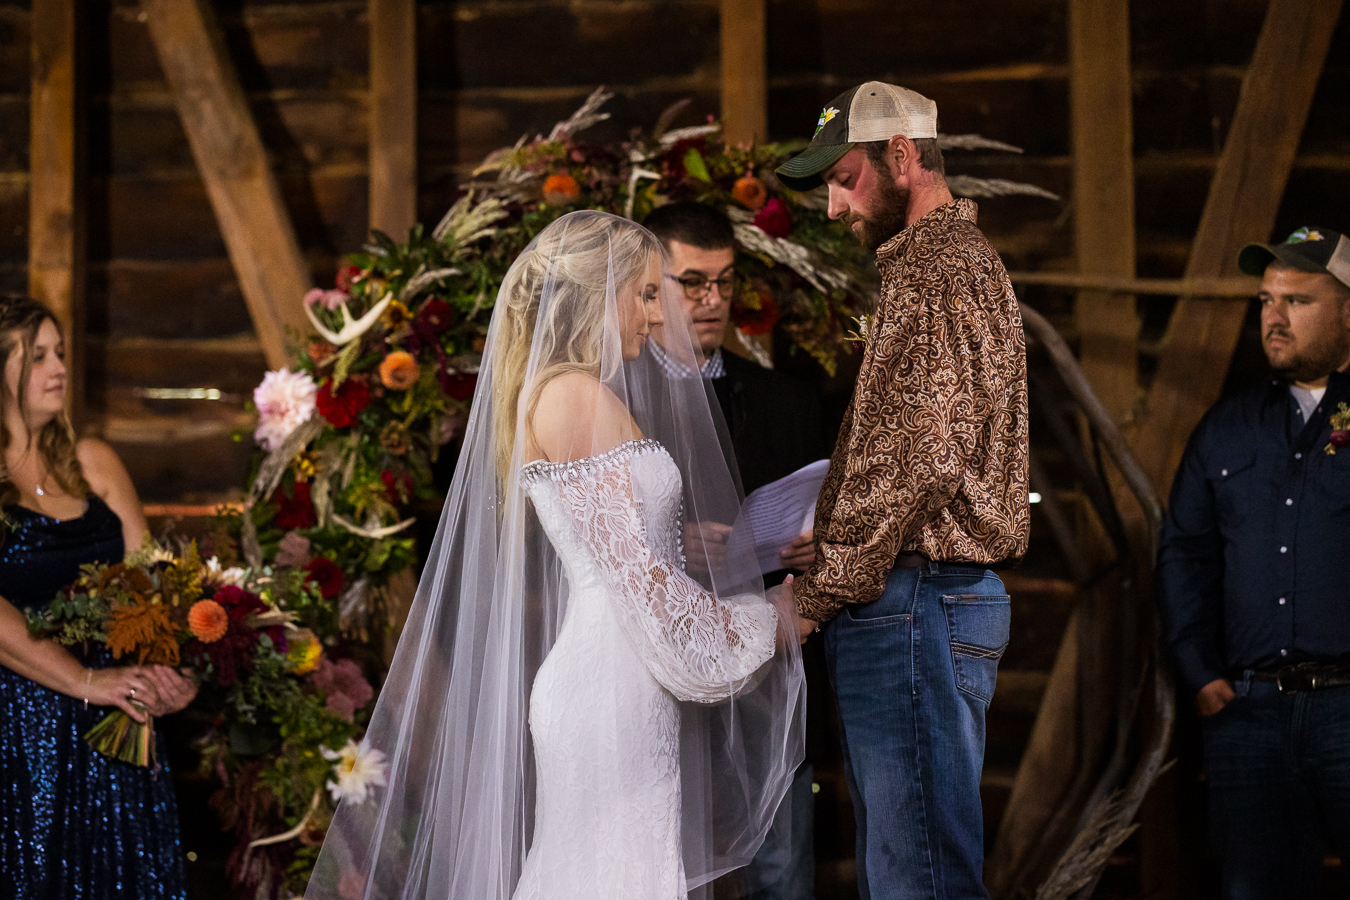 best pa country wedding photographer, lisa rhinehart, captures this sentimental moment between the bride and groom as they hold hands and share a pray together during their barn wedding ceremony in halifax pa 